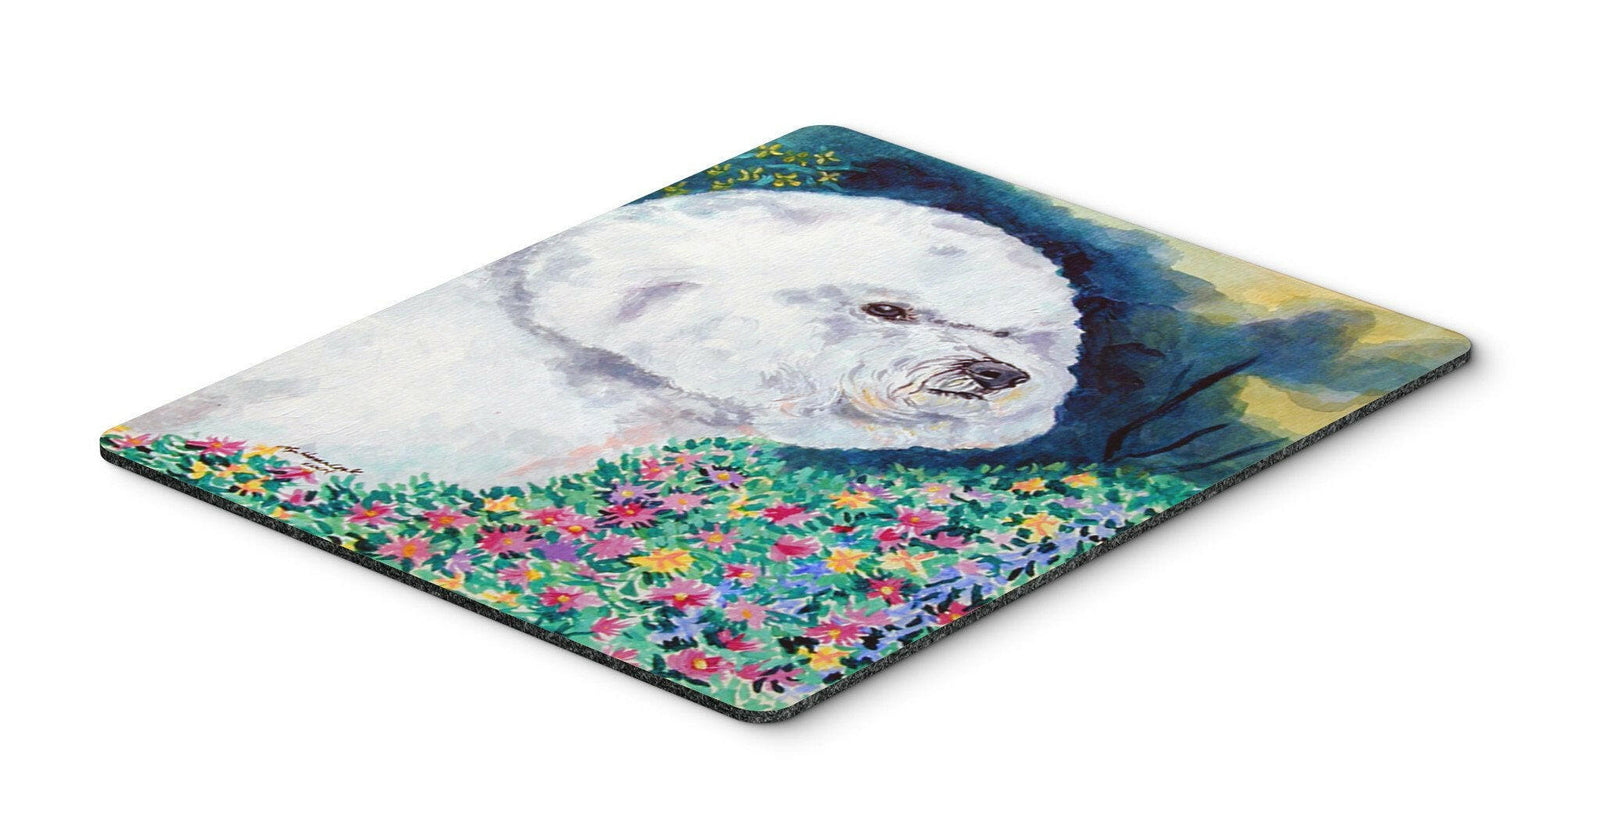 Bichon Frise in the flowers Mouse Pad / Hot Pad / Trivet by Caroline's Treasures